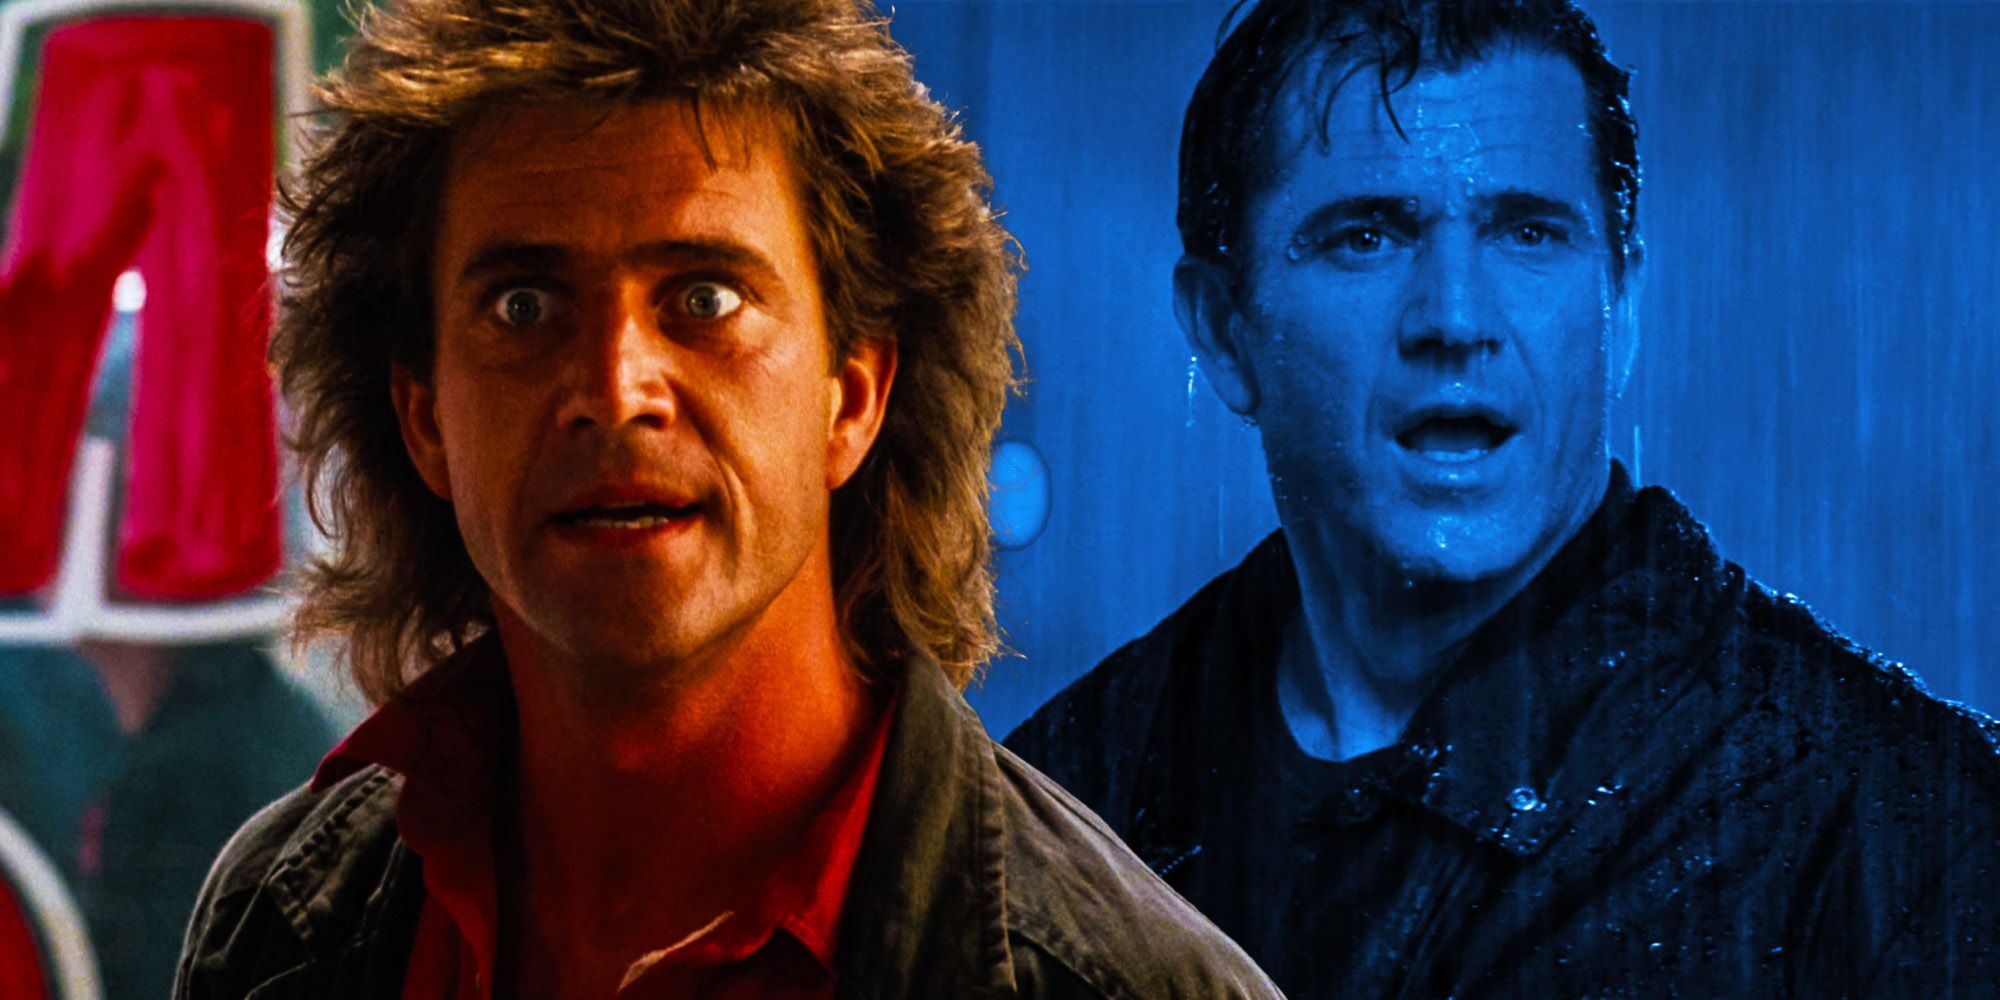 A composite image of Mel Gibson as Riggs in Lethal weapon and in Lethal Weapon 4 